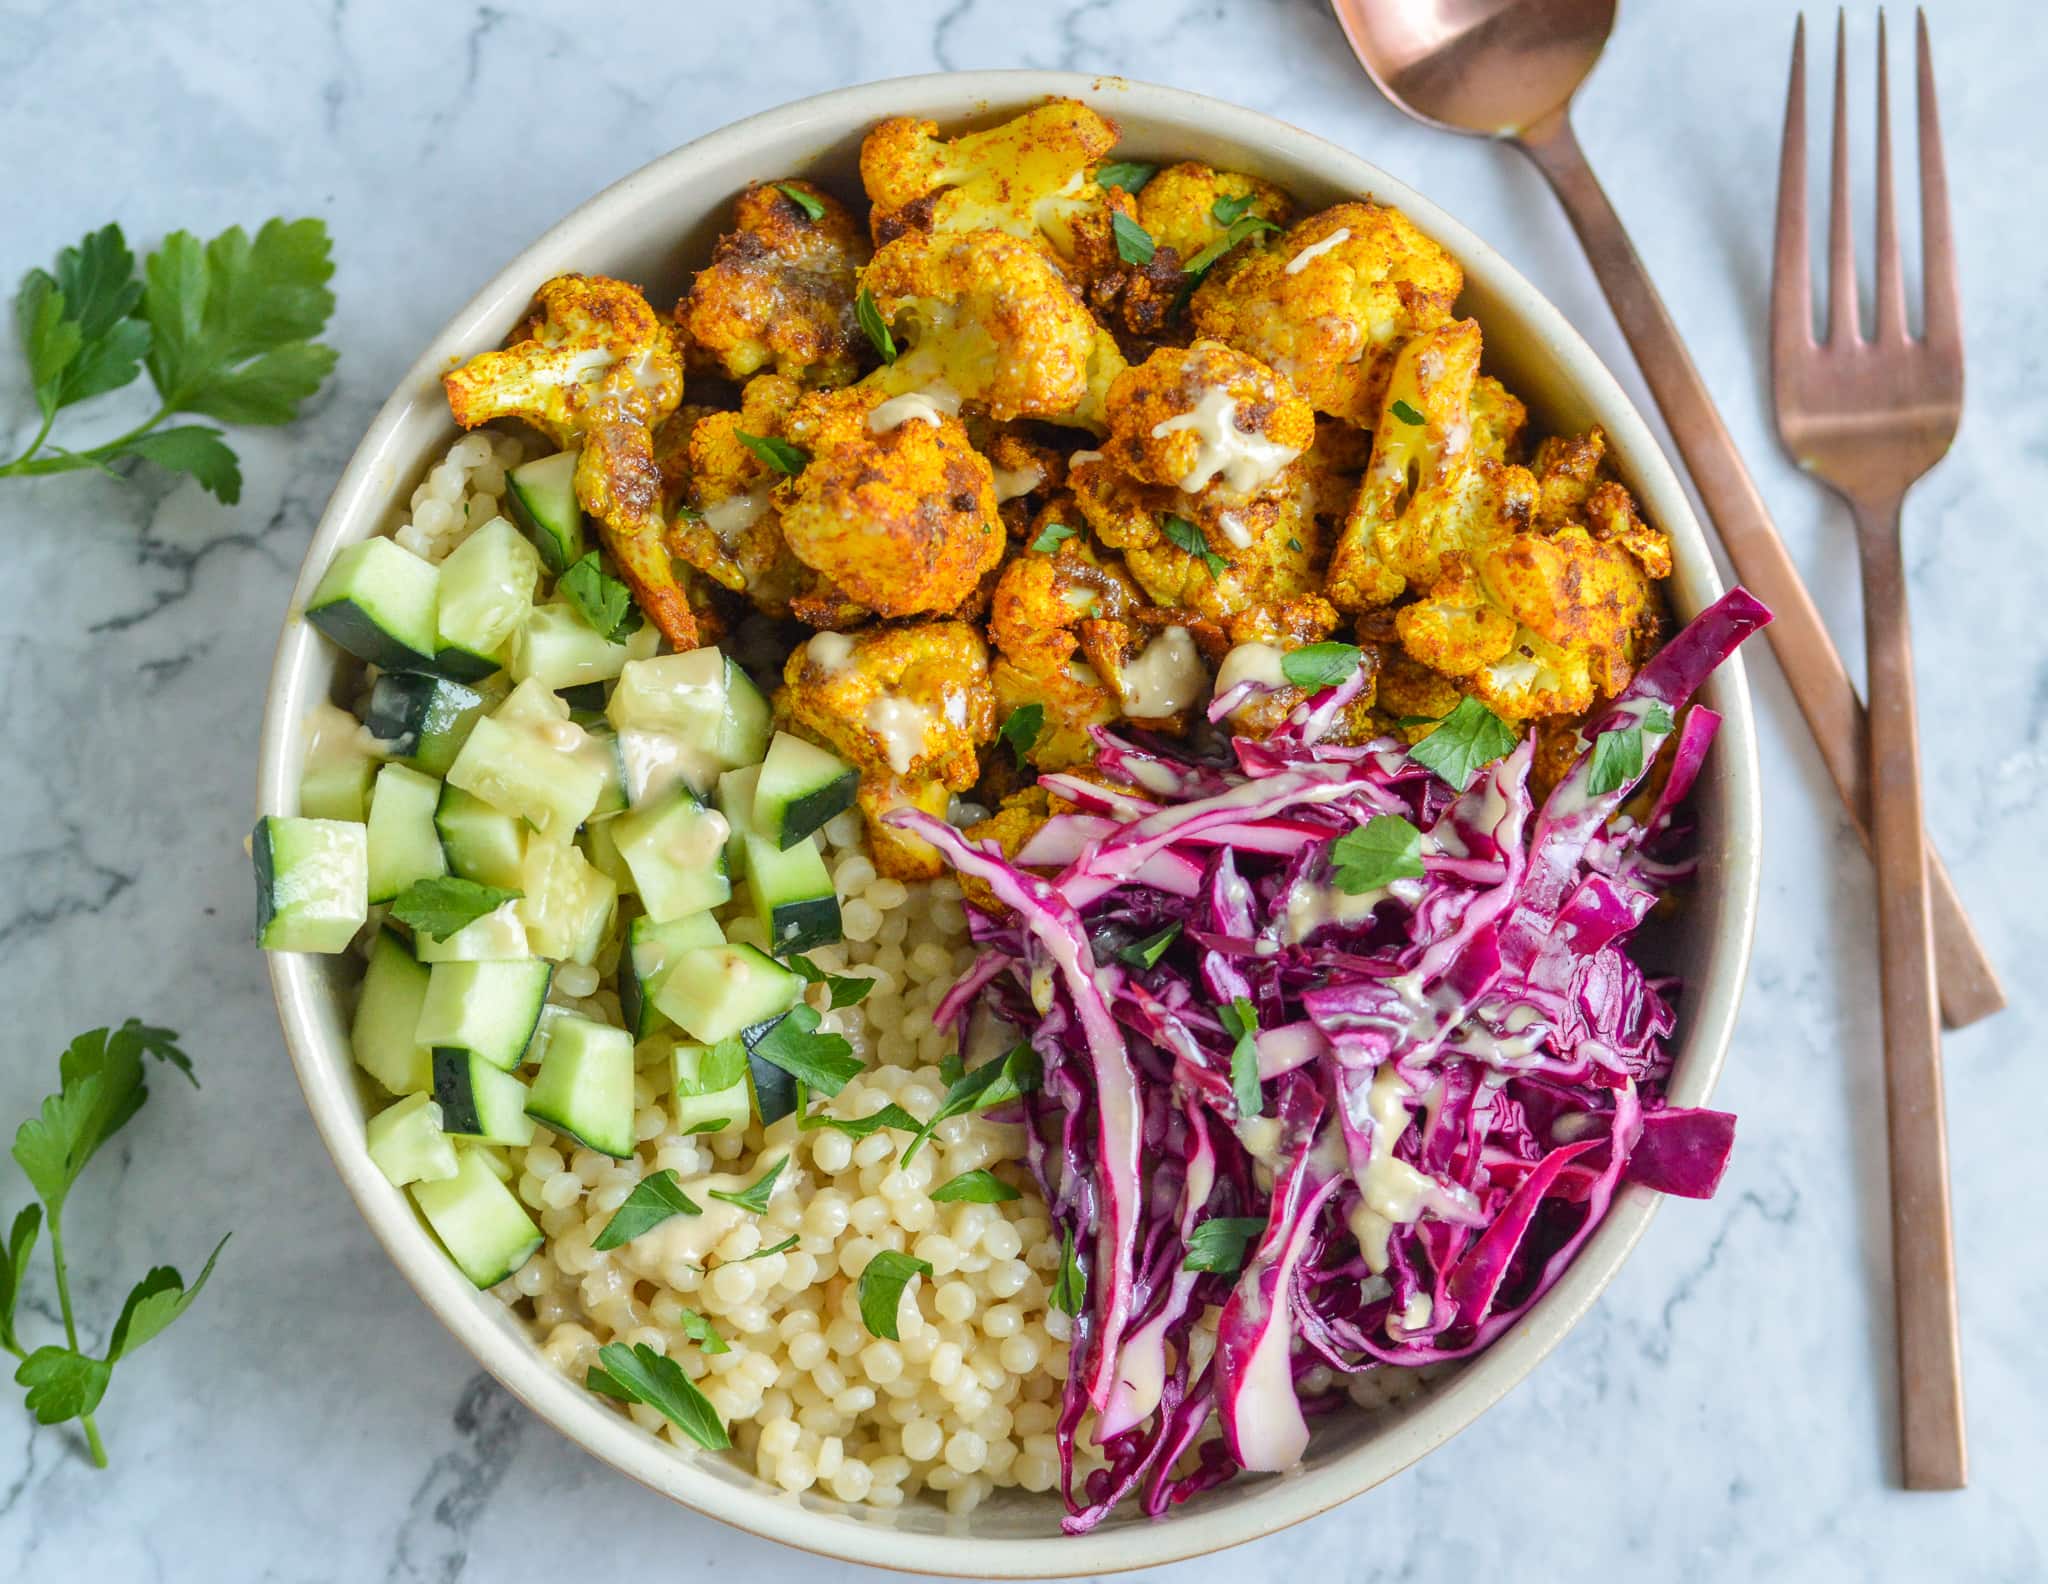 How To Build The Perfect Healthy Plant-Based Bowl, 5 step formula